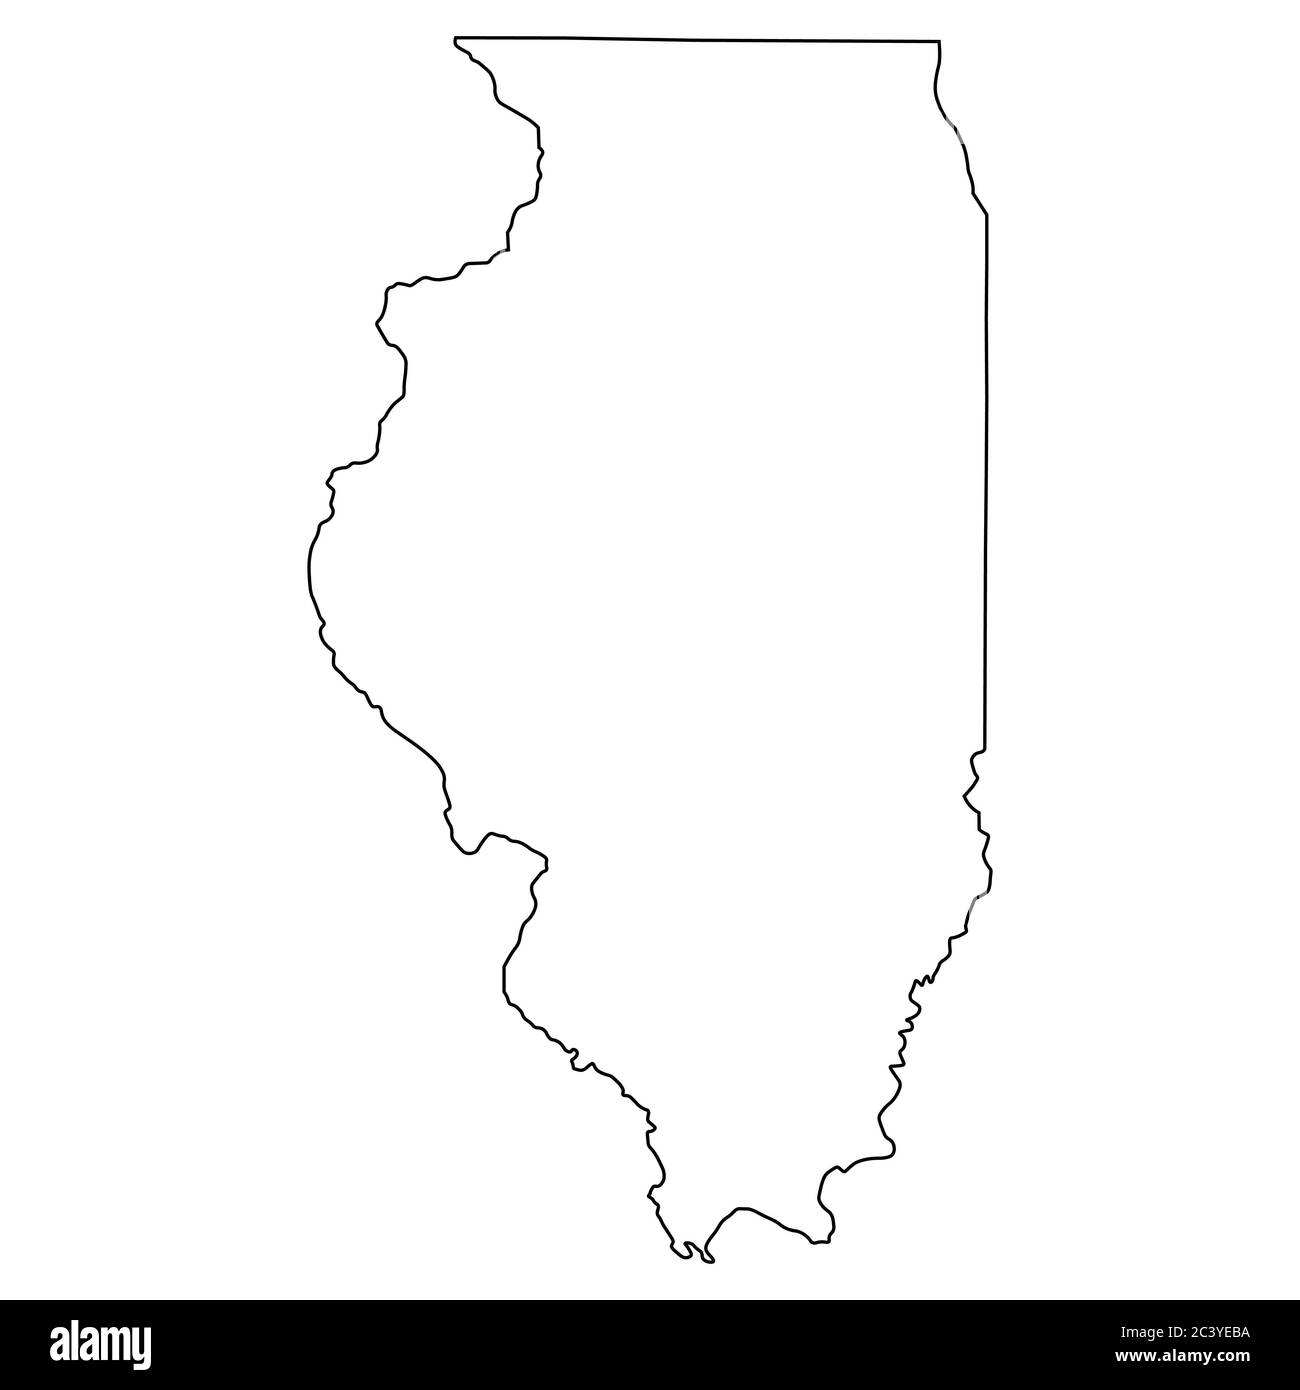 Illinois IL state Maps. Black outline map isolated on a white background. EPS Vector Stock Vector